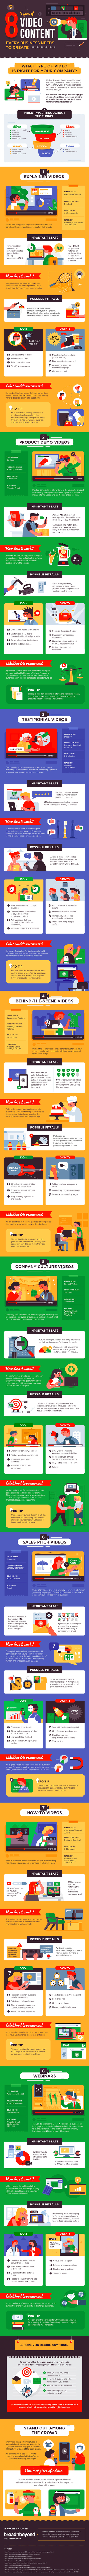 Video content types infographic